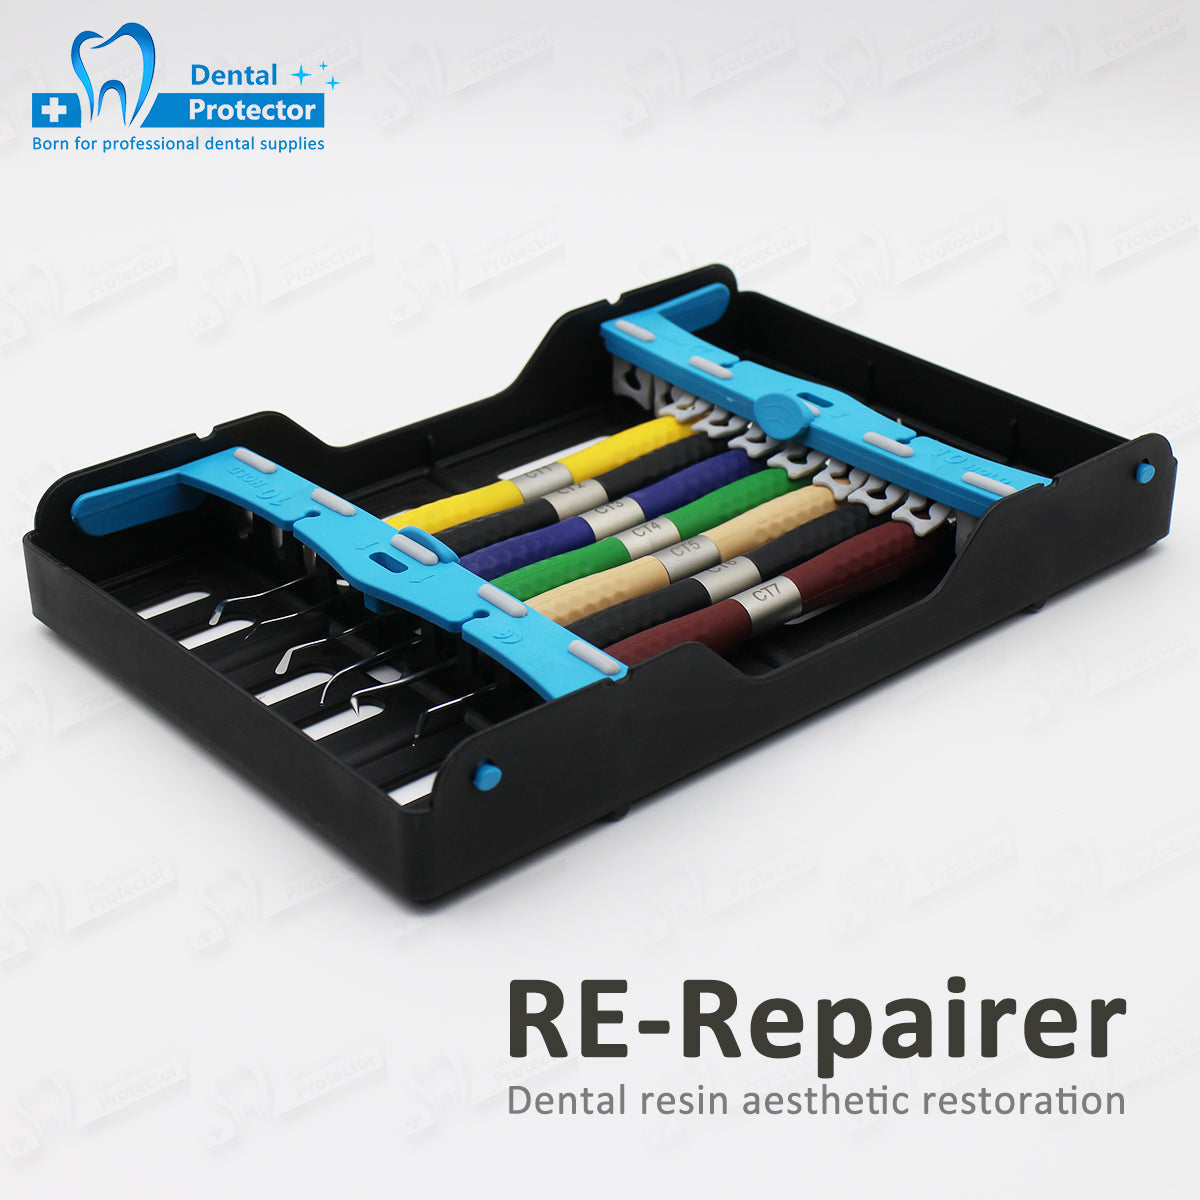 PROTECTOR RE-Repairer dental resin aesthetic restoration Resin sculpture tool Dental tools 7pcs with high temperature sterilization box